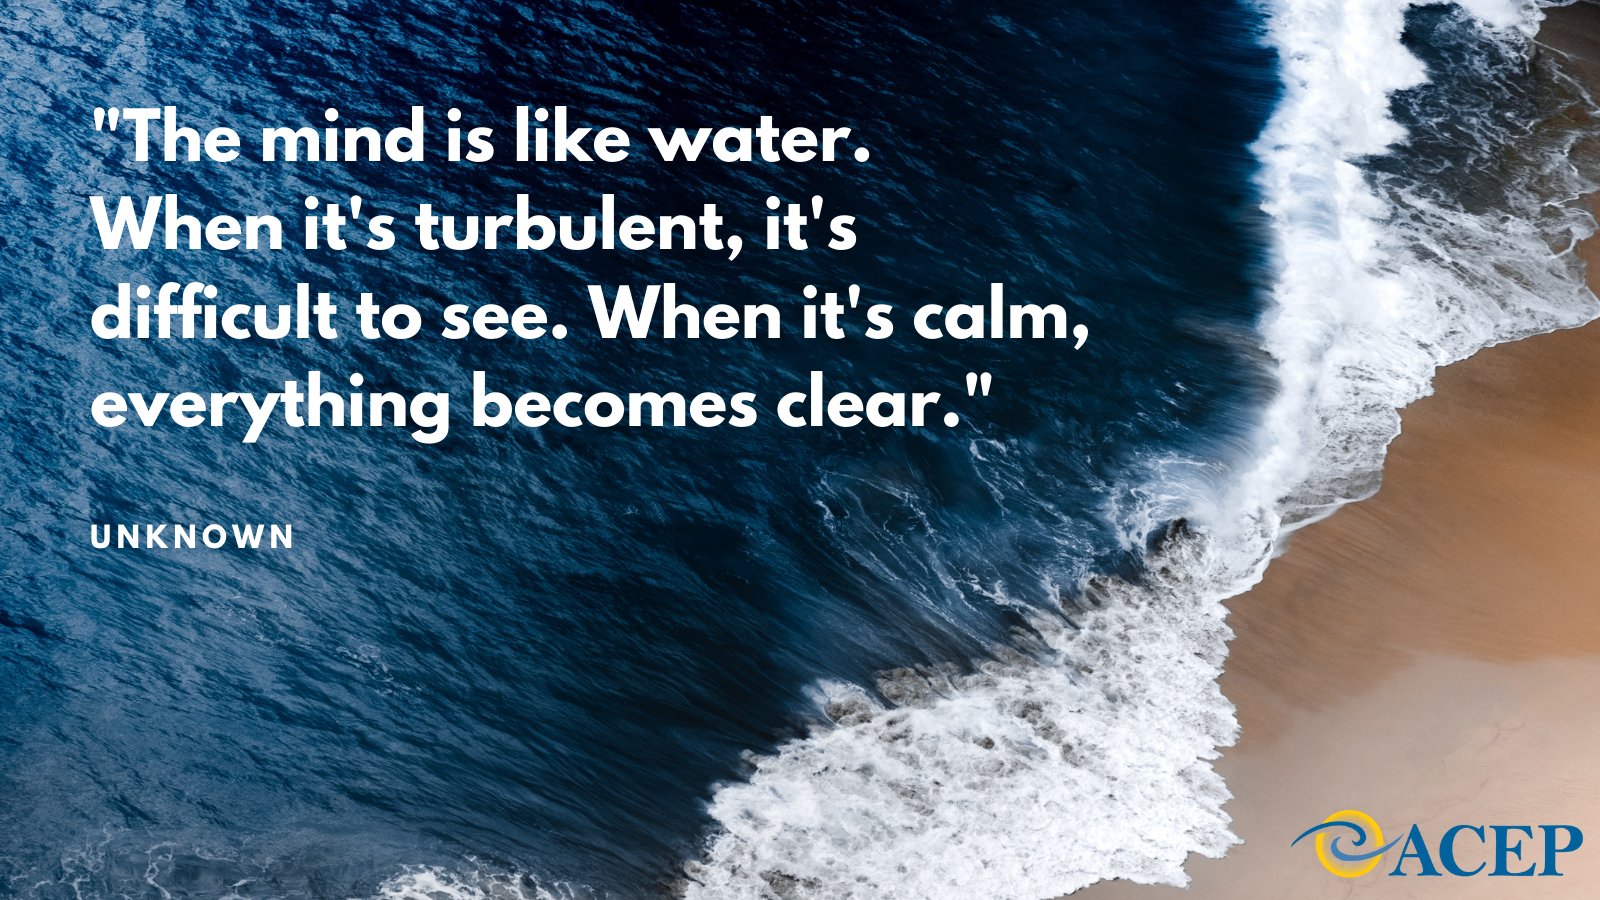 The mind is like water. When it’s turbulent, it’s difficult to see. When it’s calm, everything becomes clear.